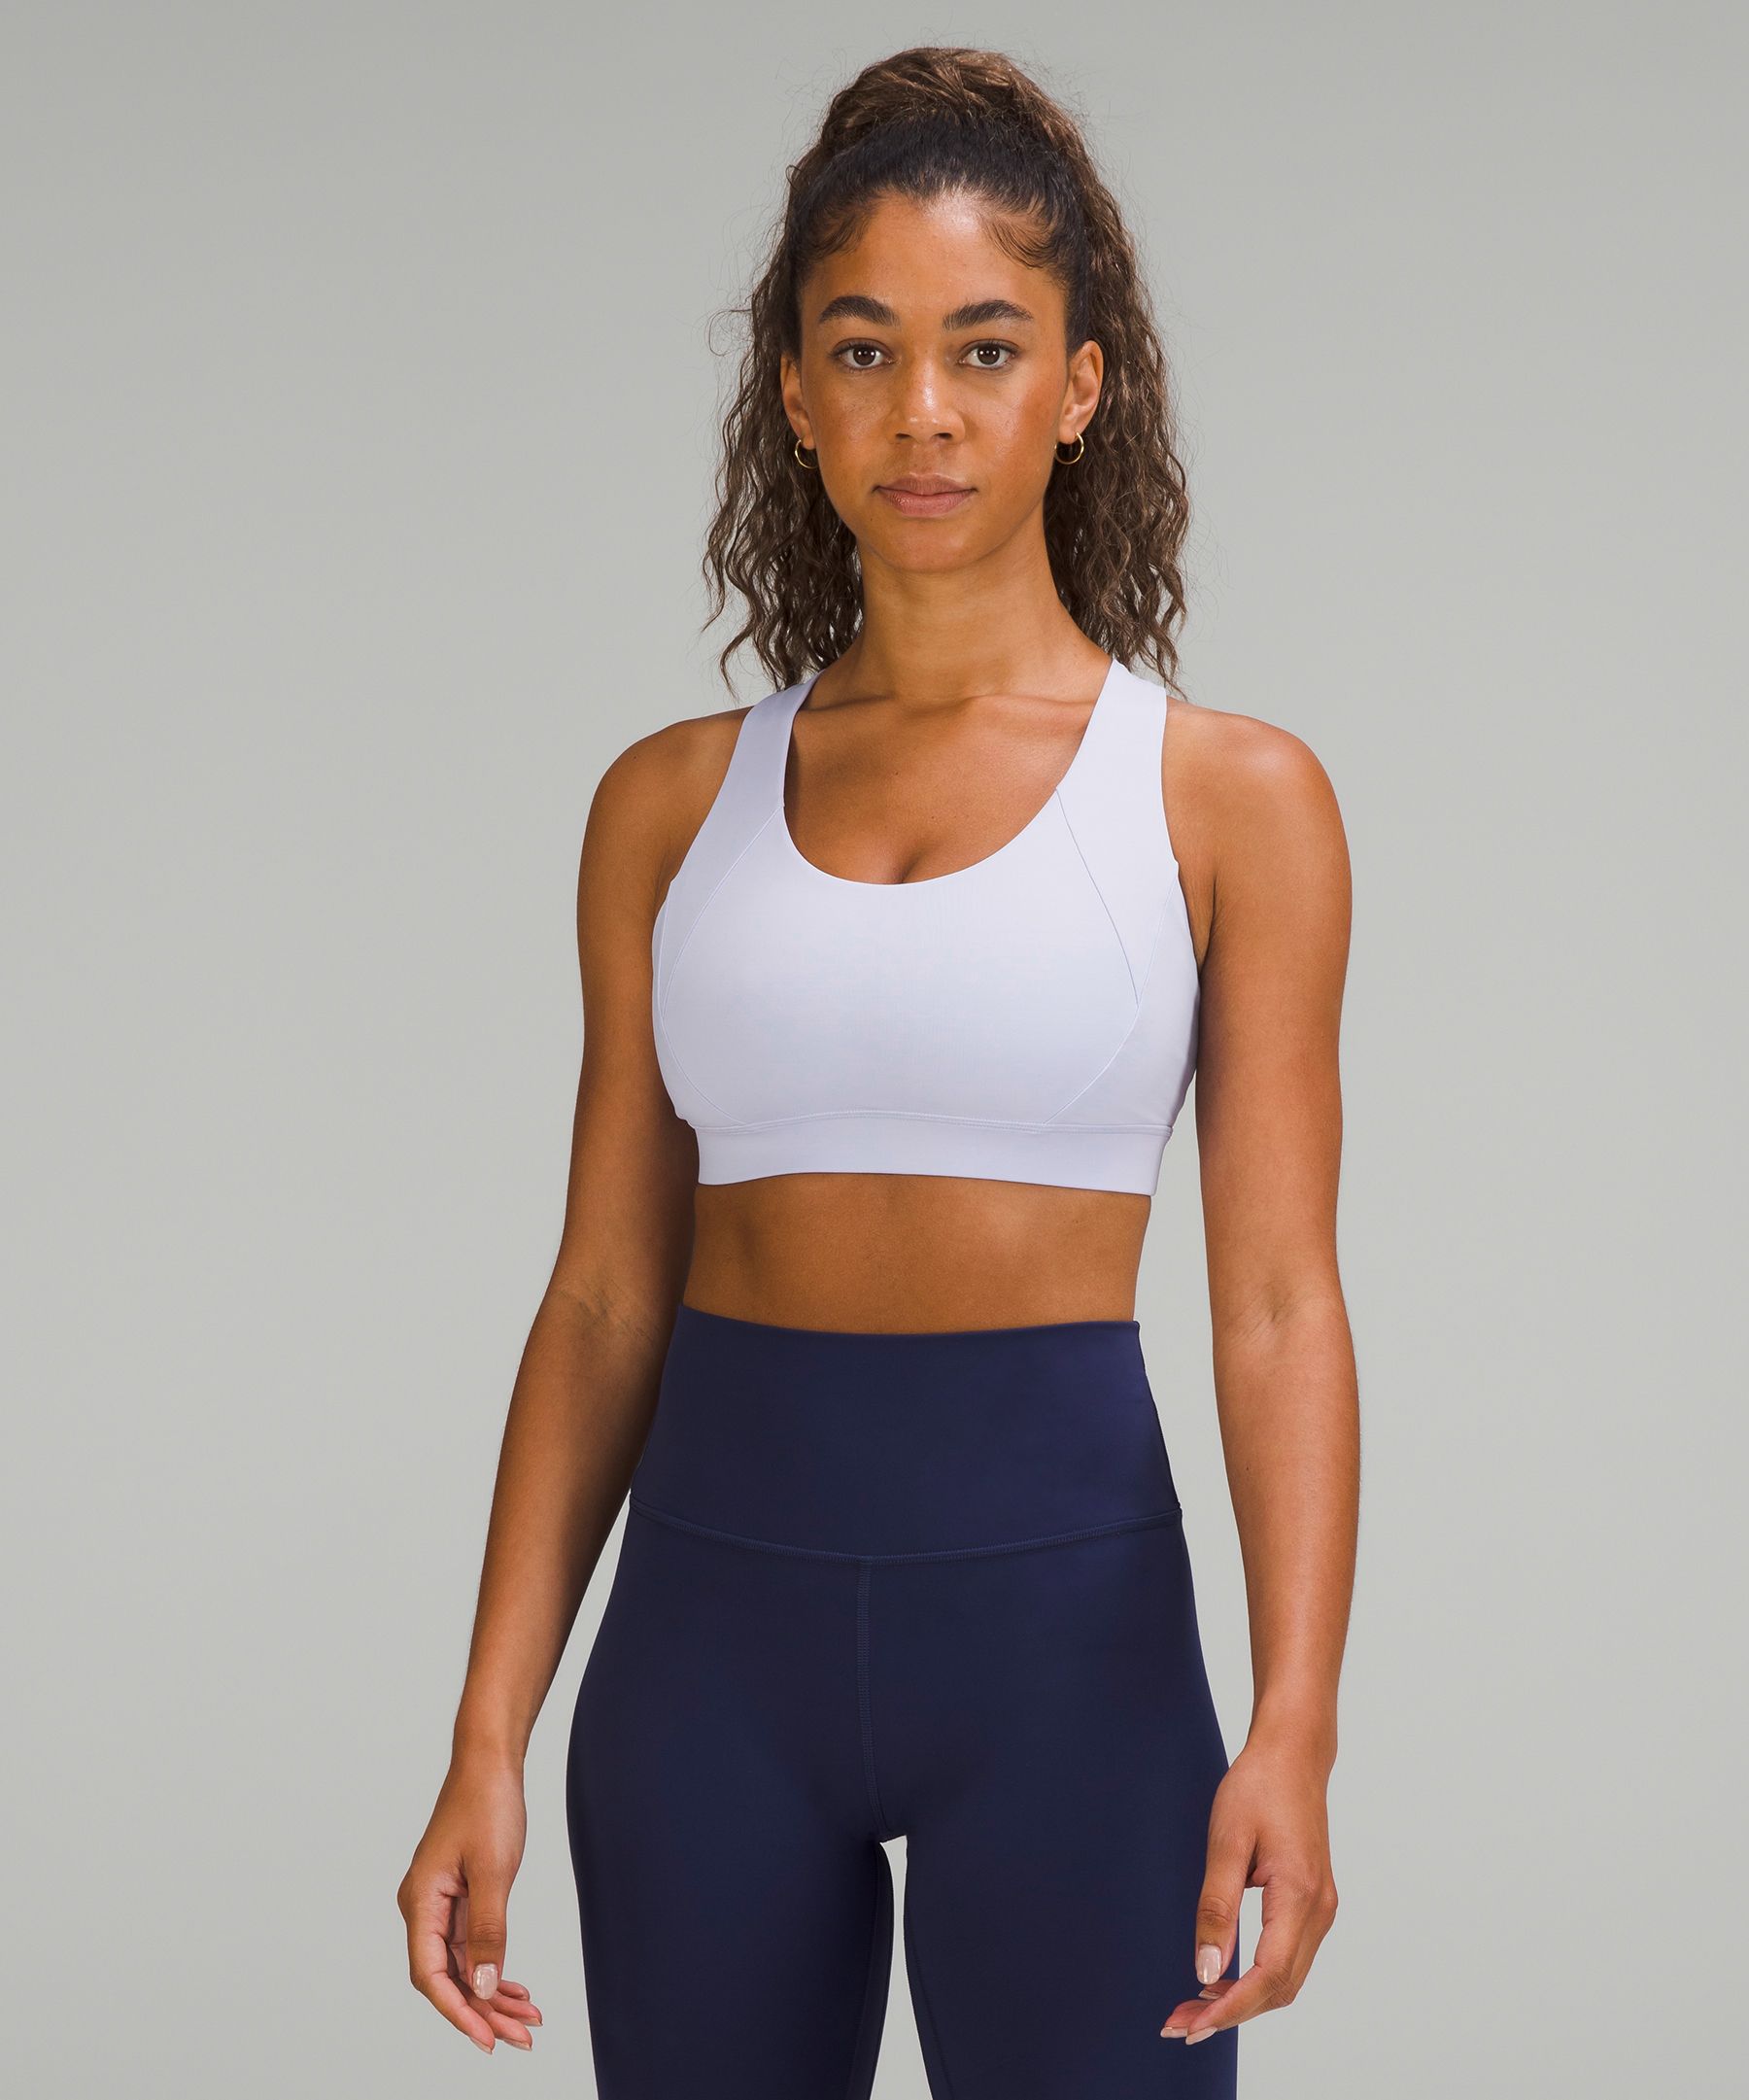 Lululemon Free To Be Elevated Bra Light Support, Dd/ddd(e) Cup In Pastel Blue